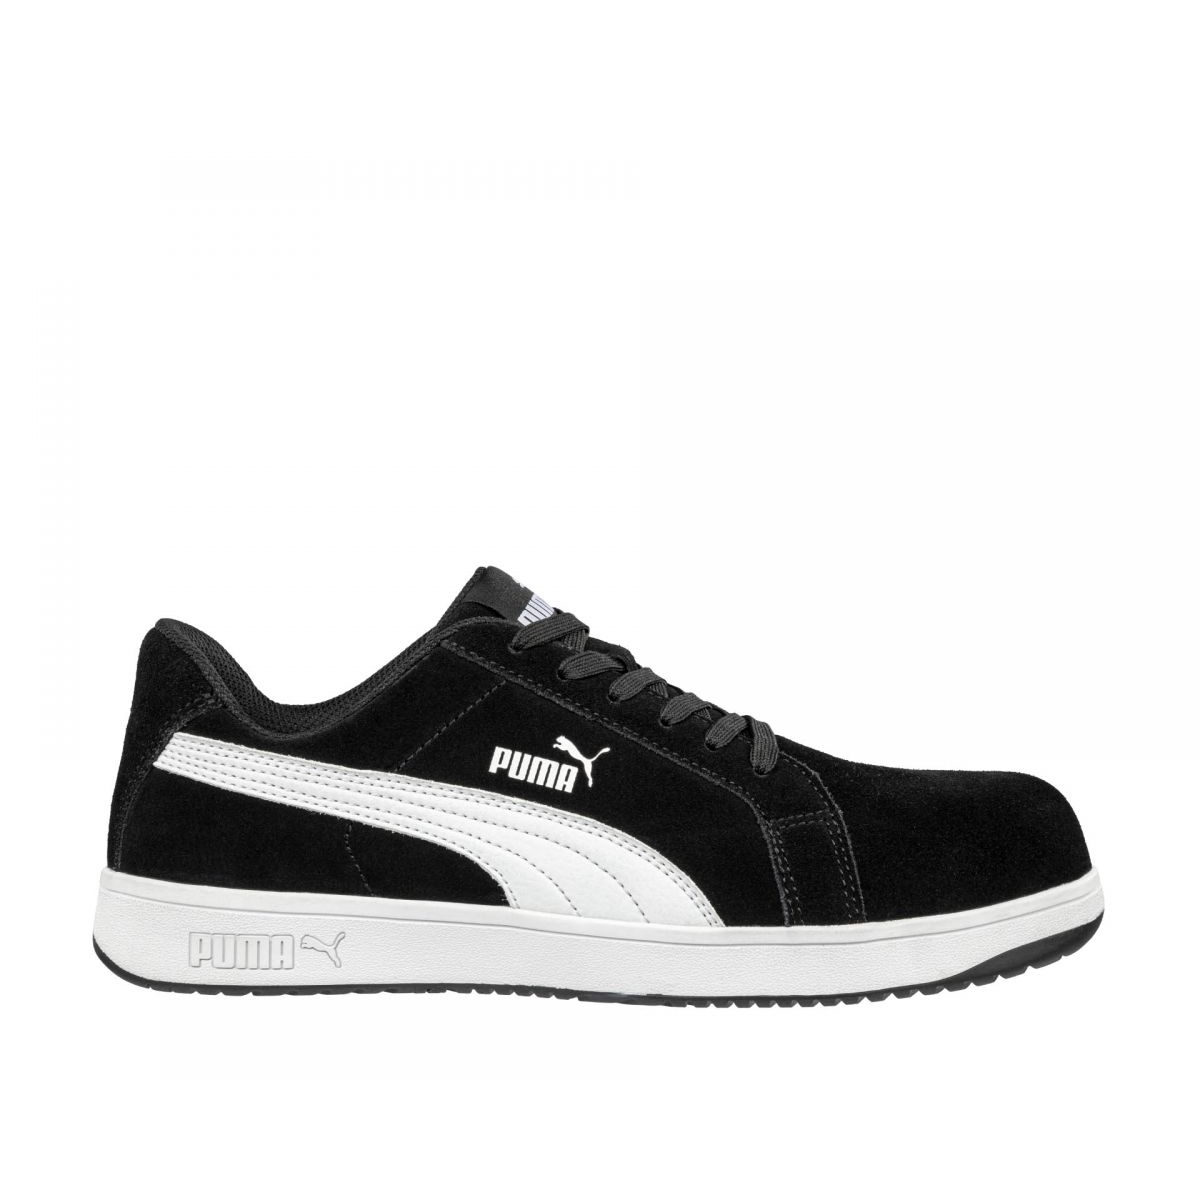 PUMA Safety Women's Iconic Low Composite Toe EH Work Shoes Black Suede - 640115 BLACK - BLACK, 5.5